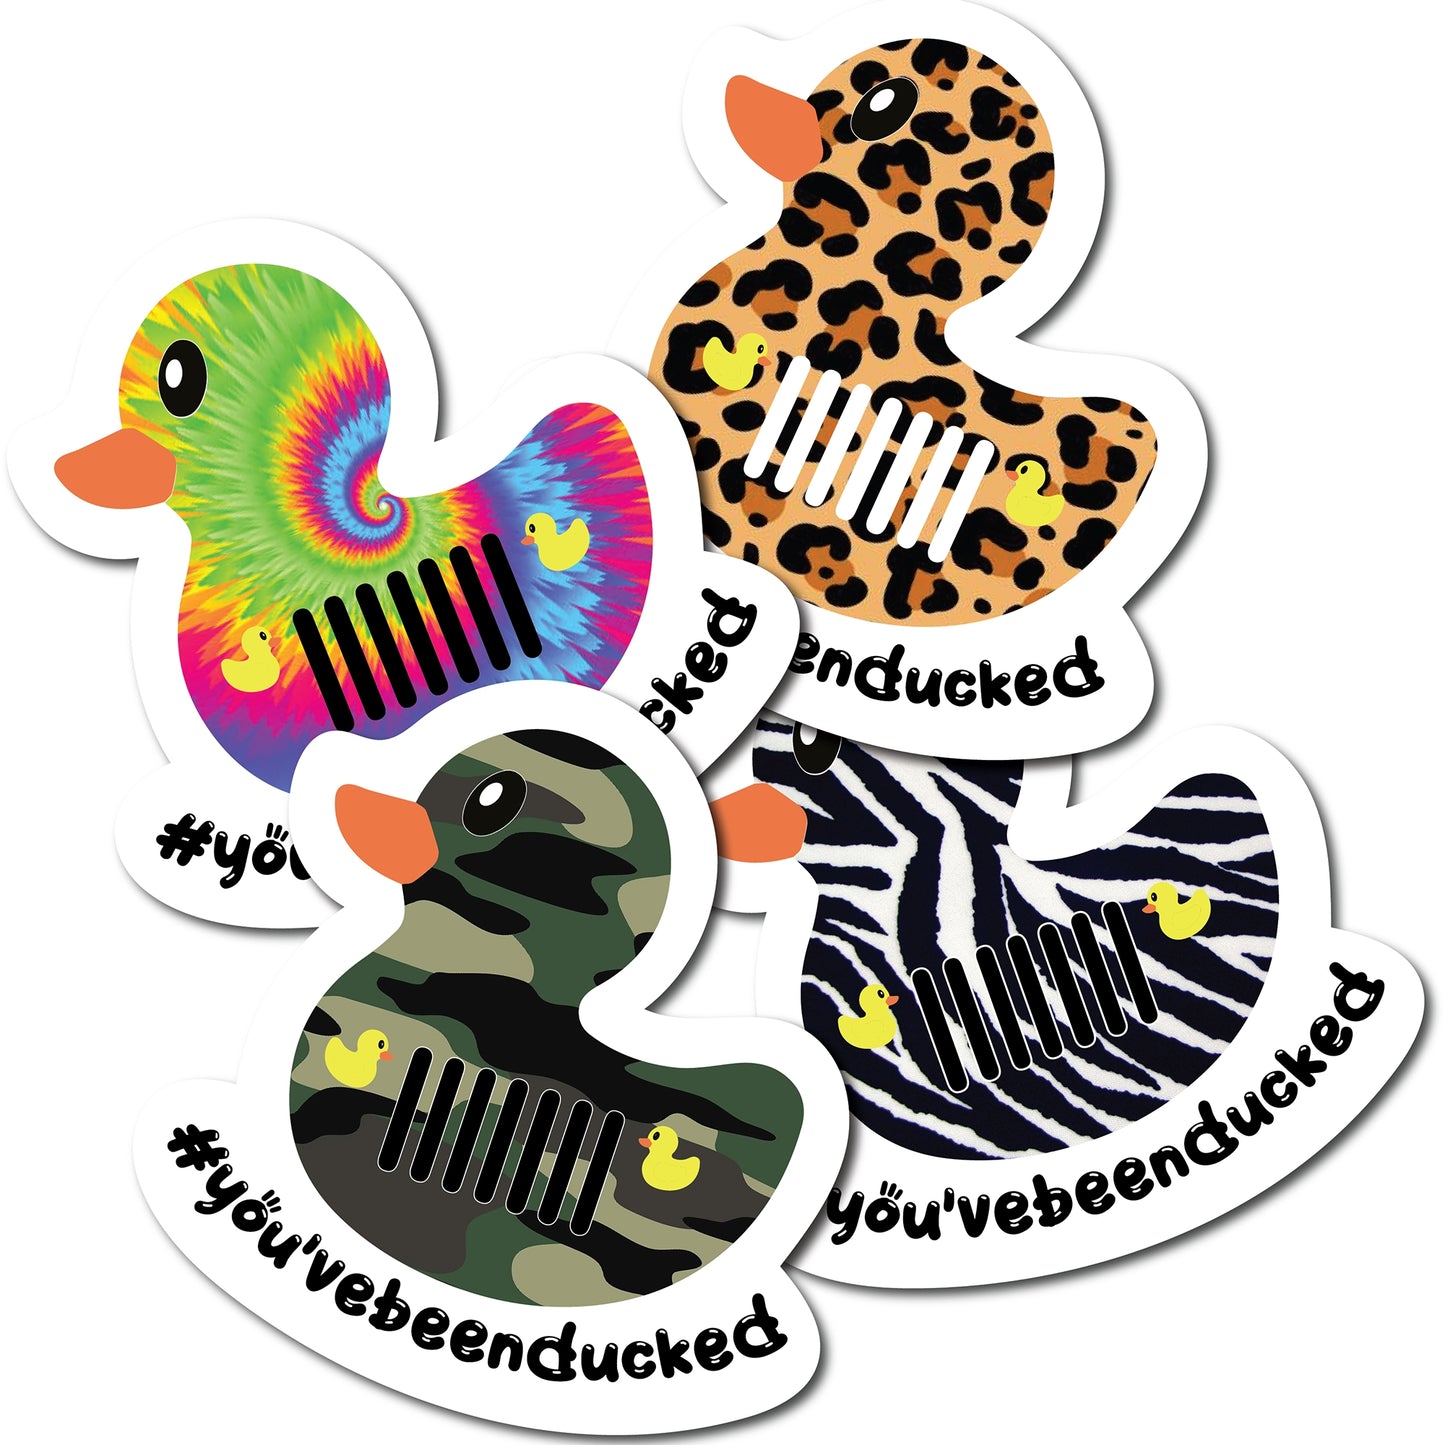 Magnet Me Up You've Been Ducked Cute Vehicle Duck Magnets, Ducking Game, 4 Pk, 4x4 in, Army Tie Dye Leopard Zebra, Heavy Duty Automotive Magnet for Car Truck SUV Funny Joke Prank